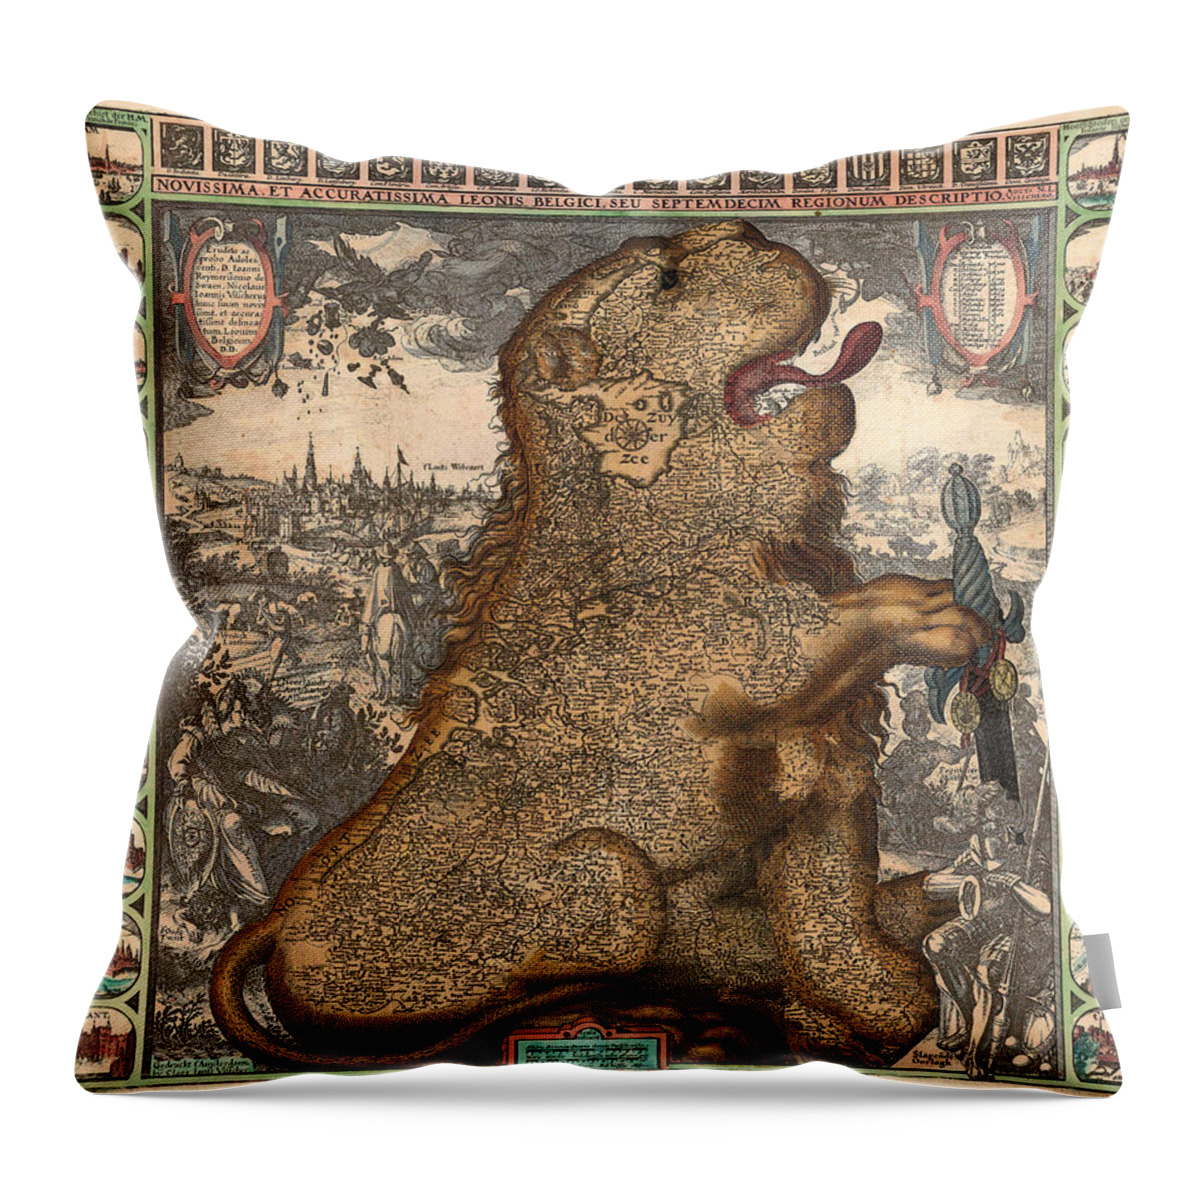 Antique Map Of Leo Belgium Throw Pillow featuring the drawing Antique Maps - Old Cartographic maps - Antique Map of Belgium - Leo Belgicus by Studio Grafiikka